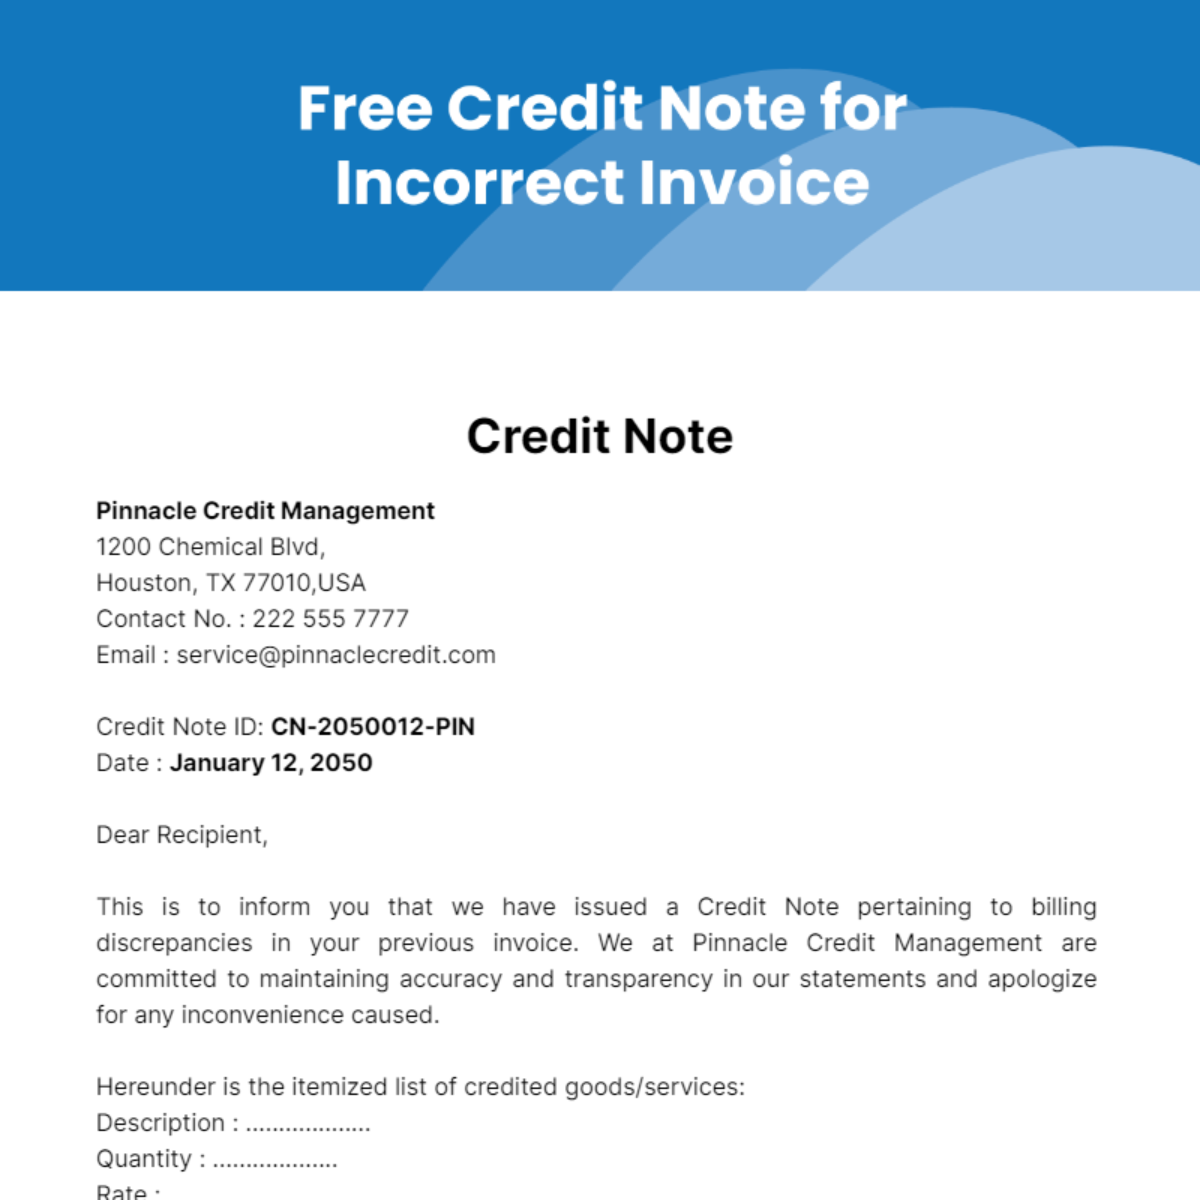 Free Credit Note for Incorrect Invoice Template